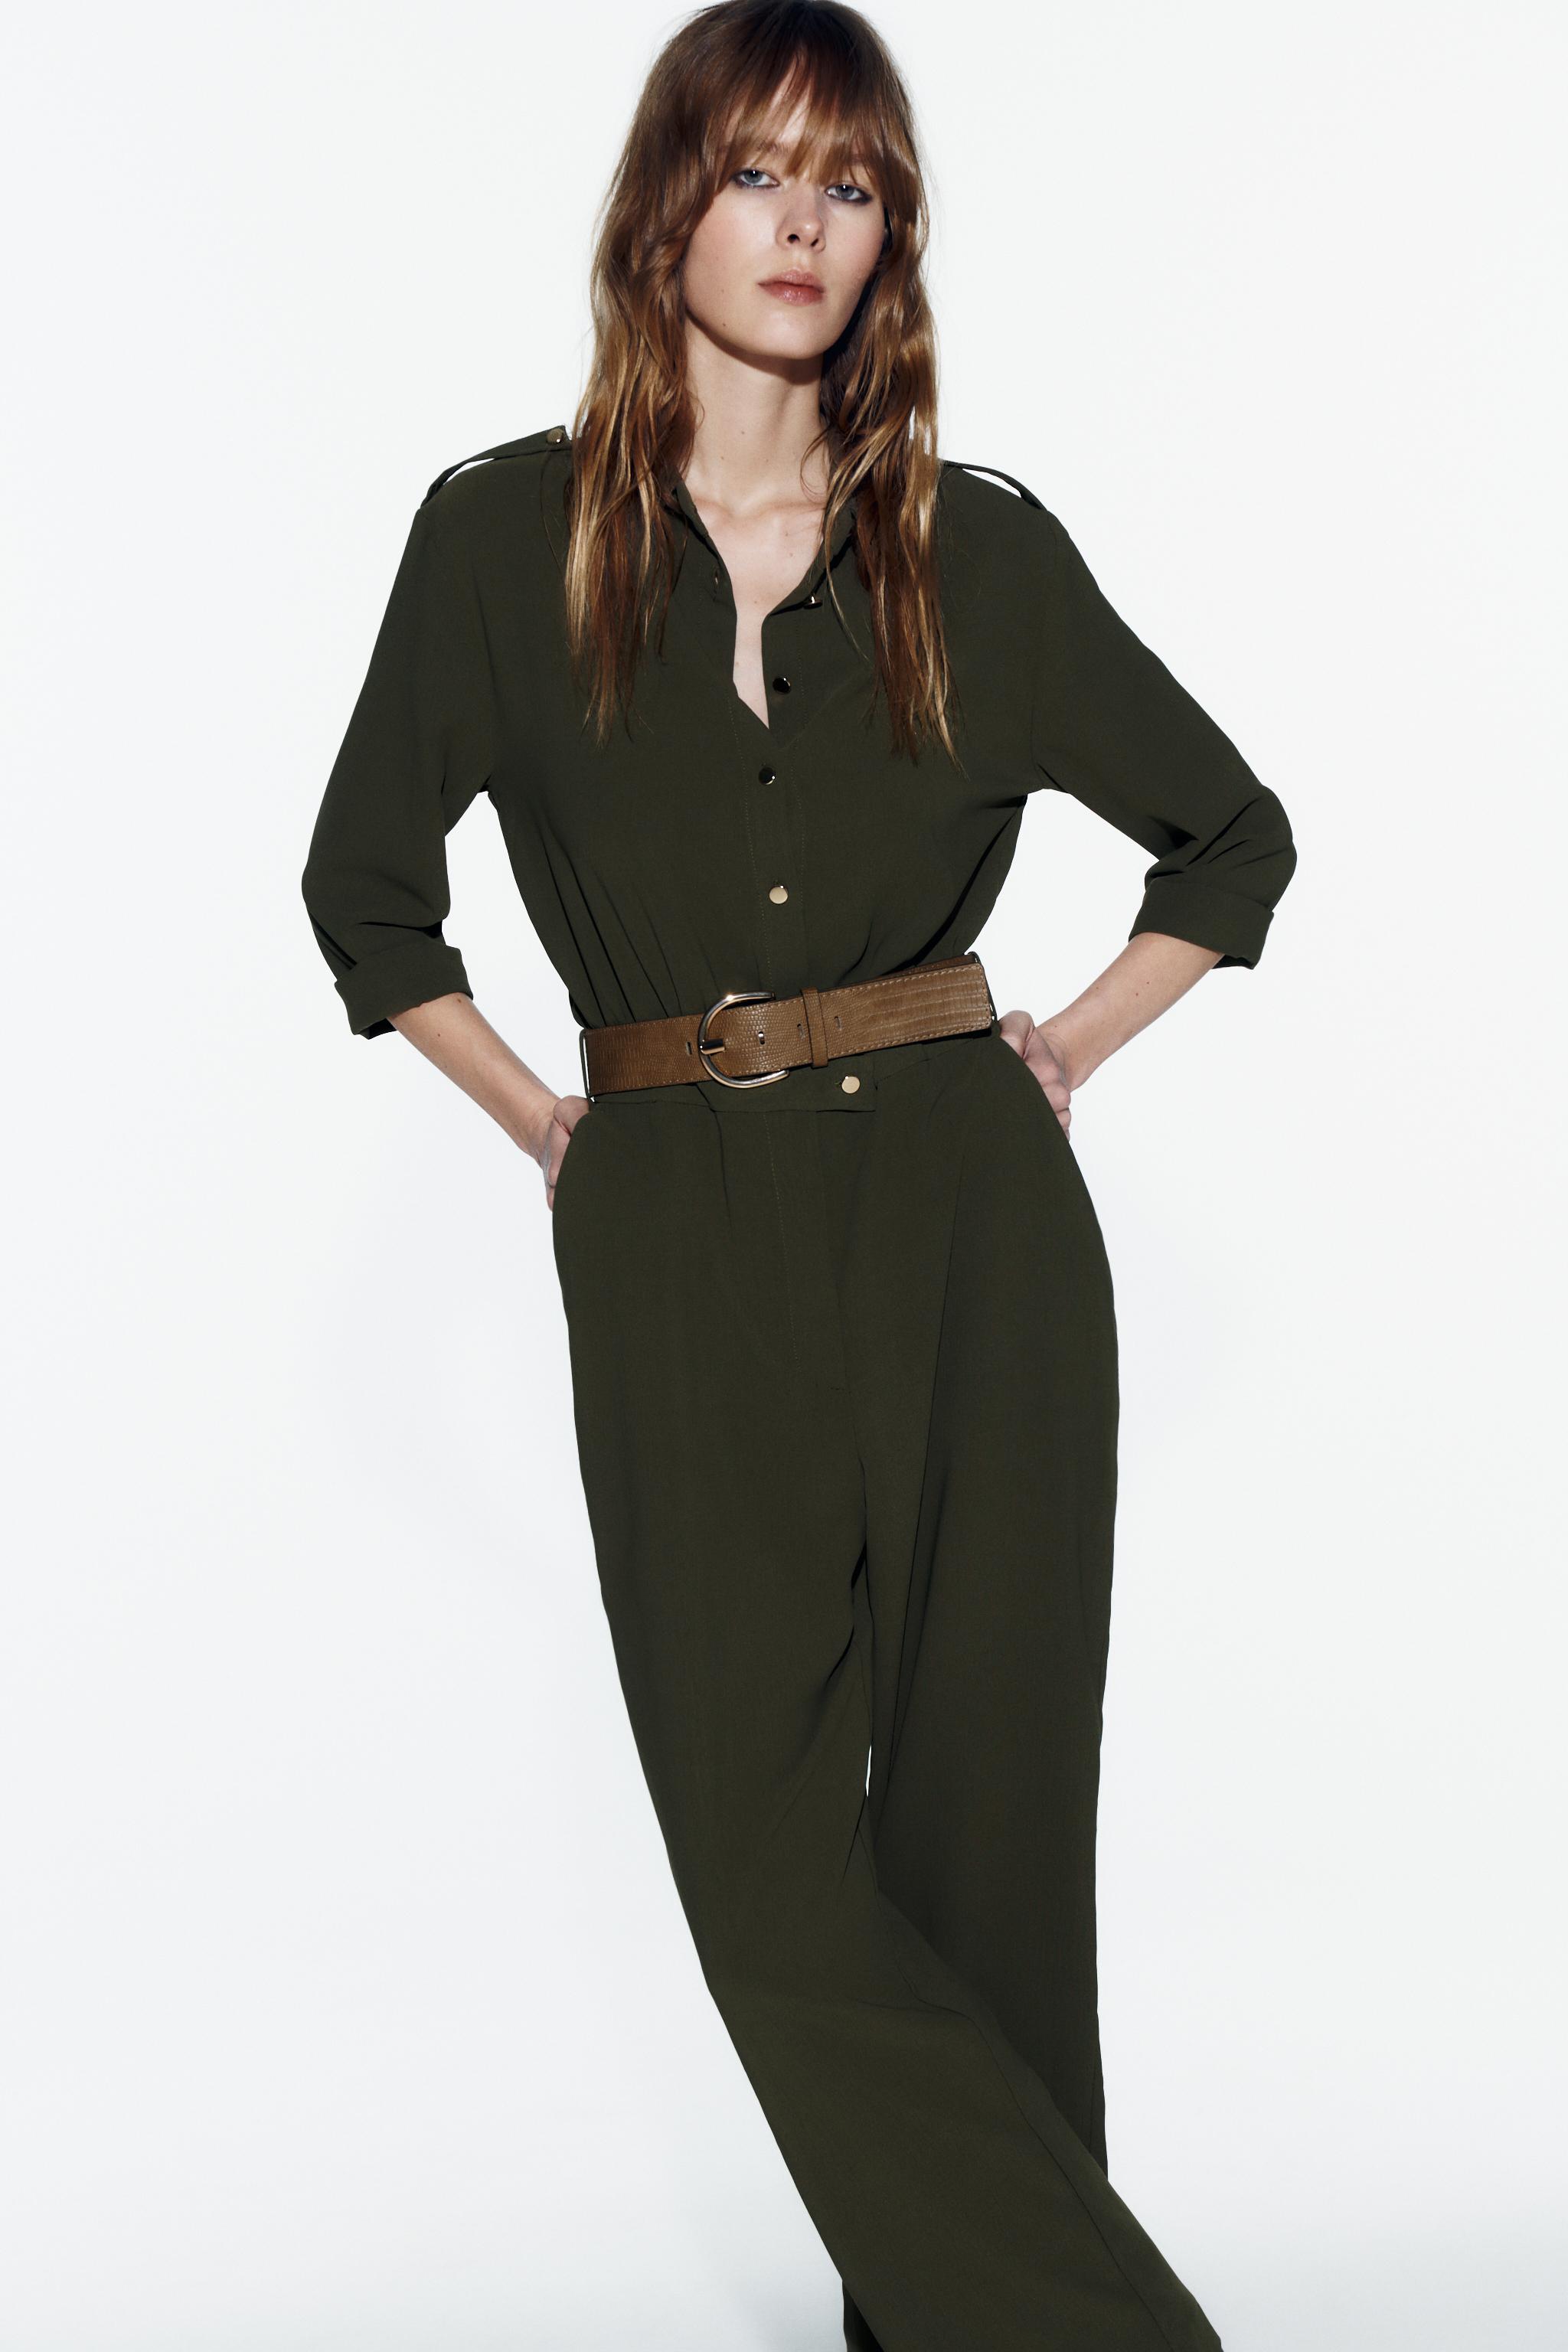 TAUPE JUMPSUIT  Fashion clothes women, Online fashion stores, Fashion  outfits